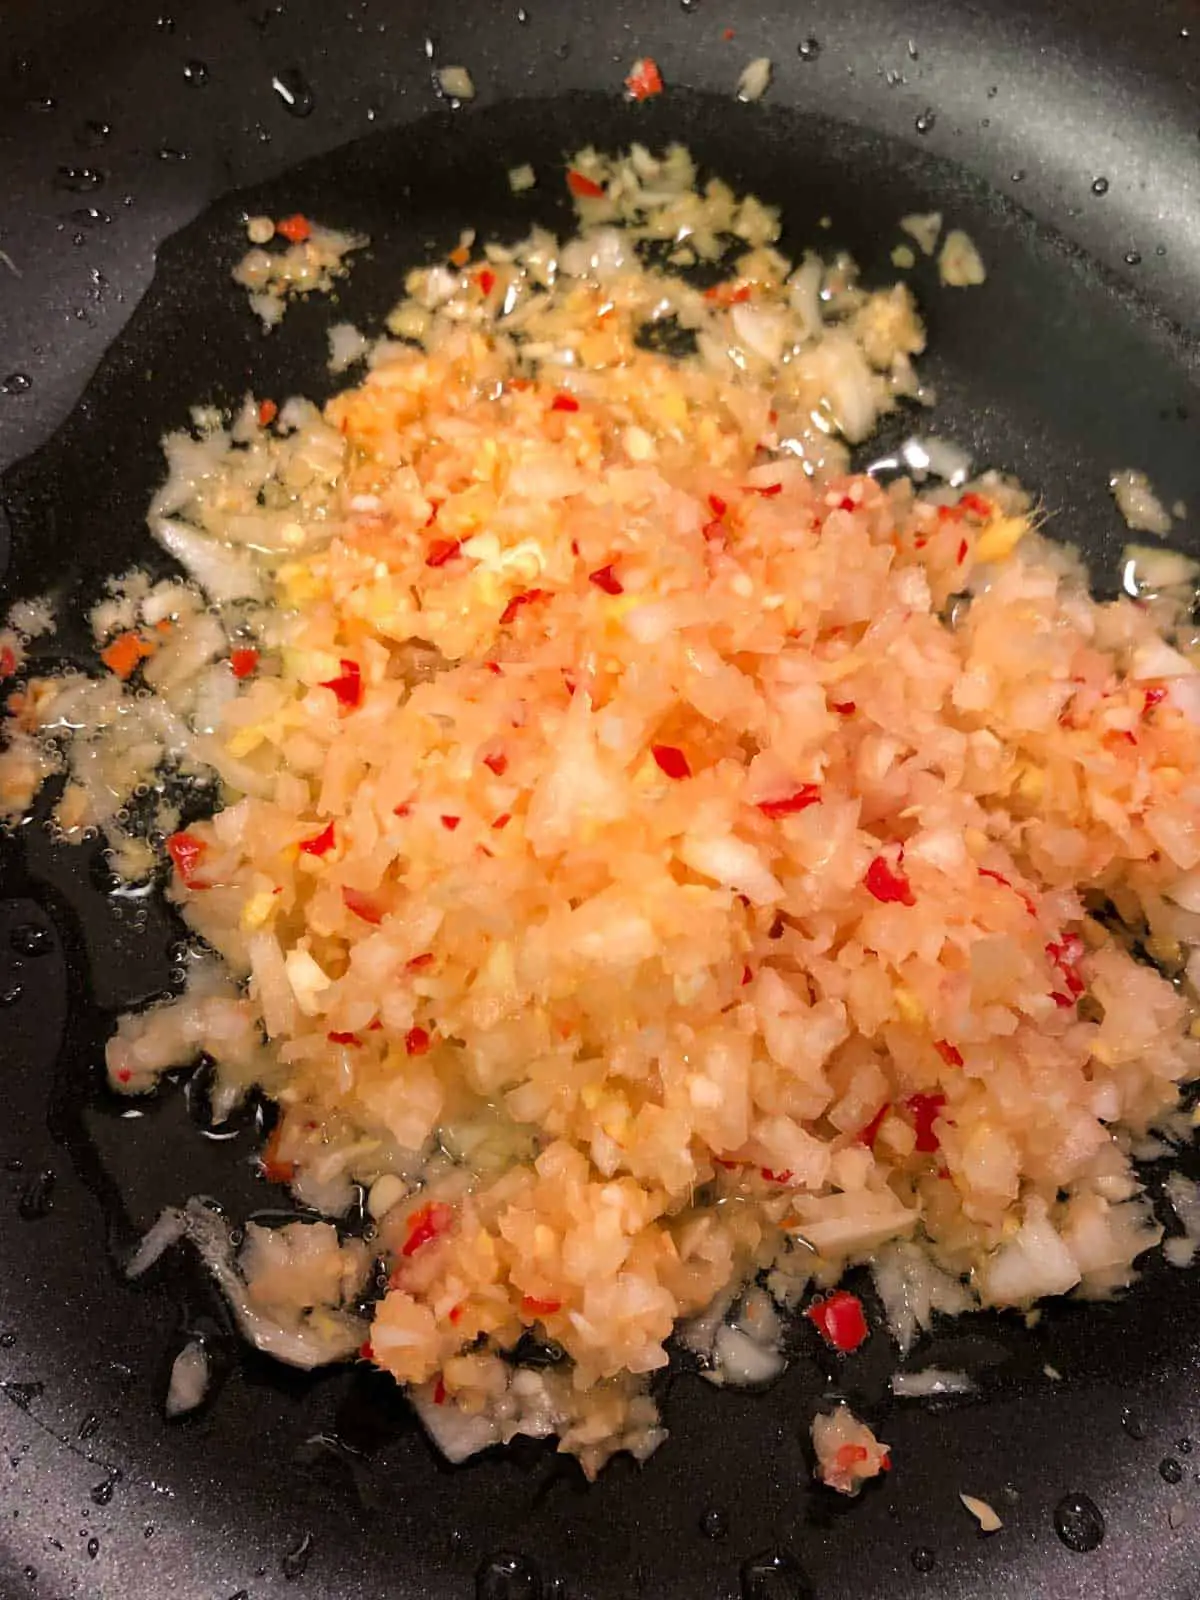 Minced onion, garlic, chilies, and ginger in oil in a large skillet.